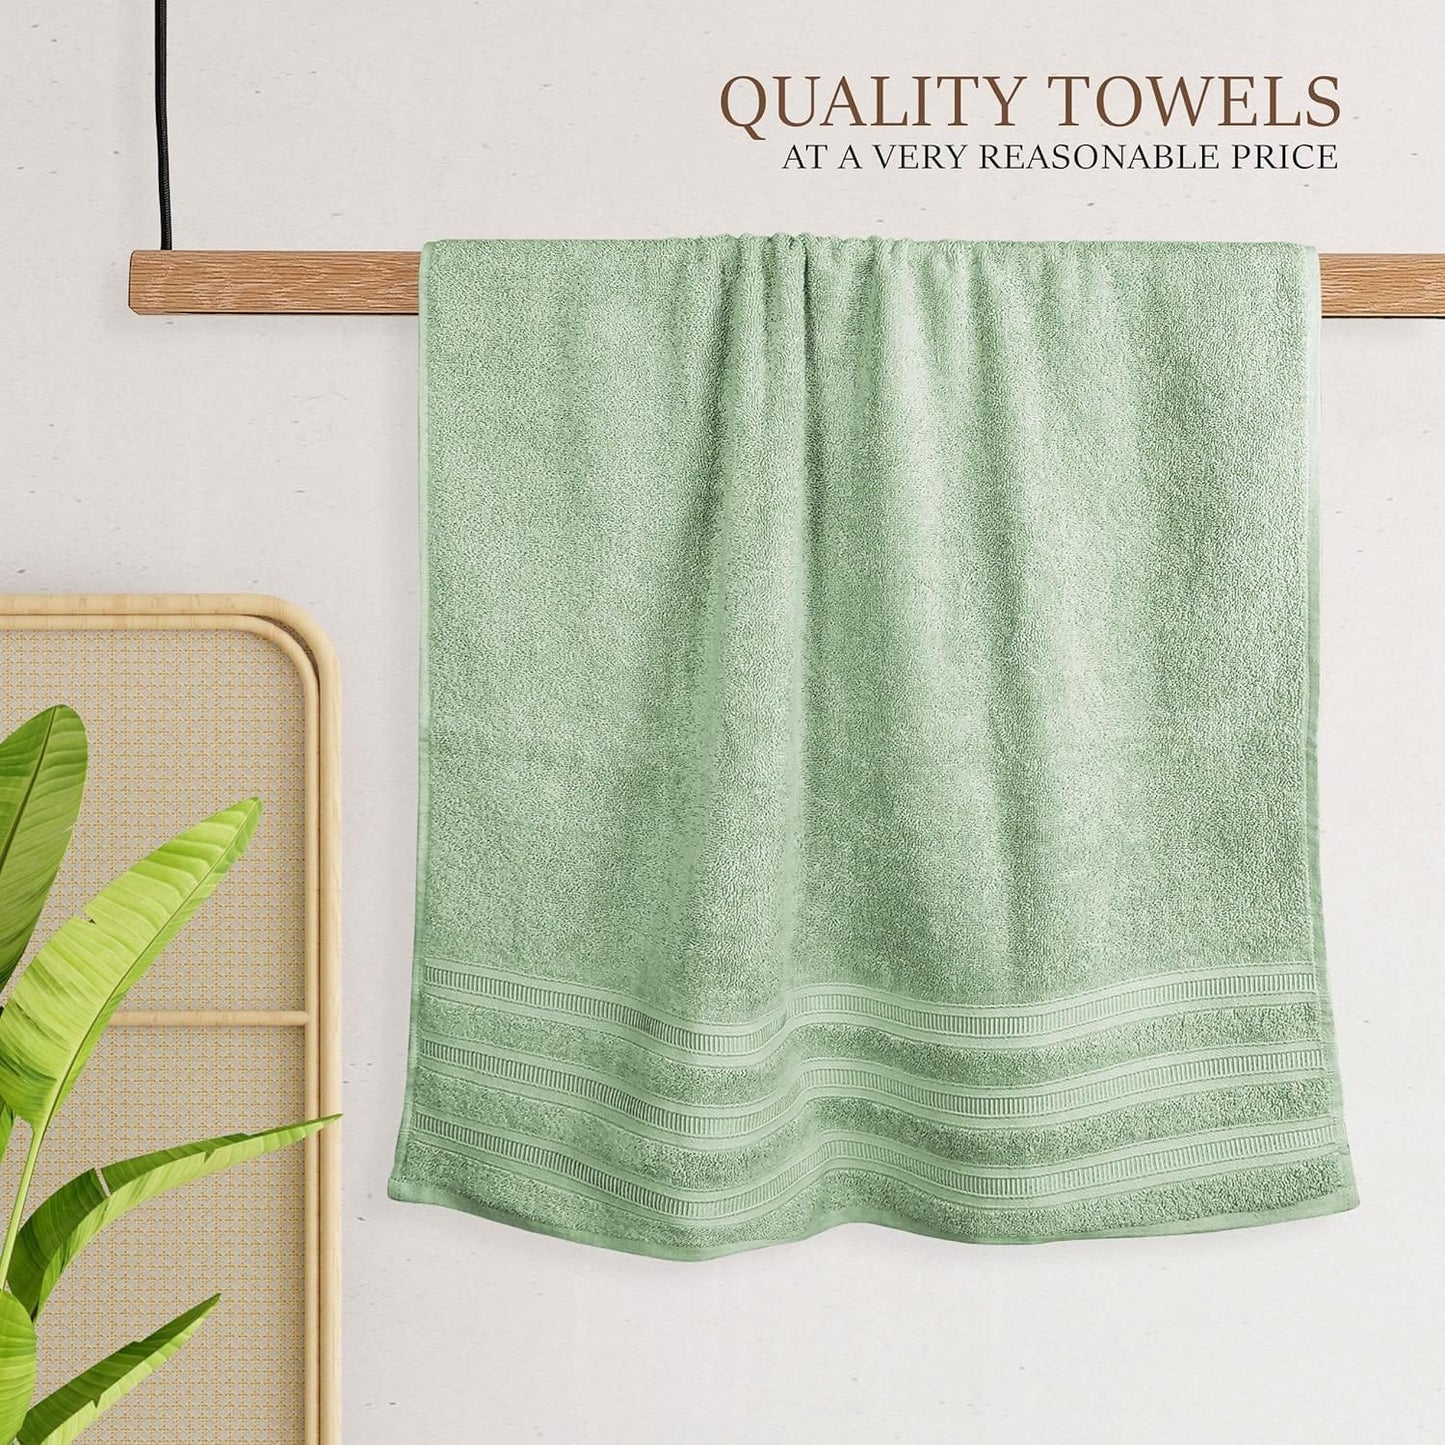 Ritz Collection Towel Sets Bale Viscose Stripe Towels Range Highly Absorbent OLIVIA ROCCO Towel